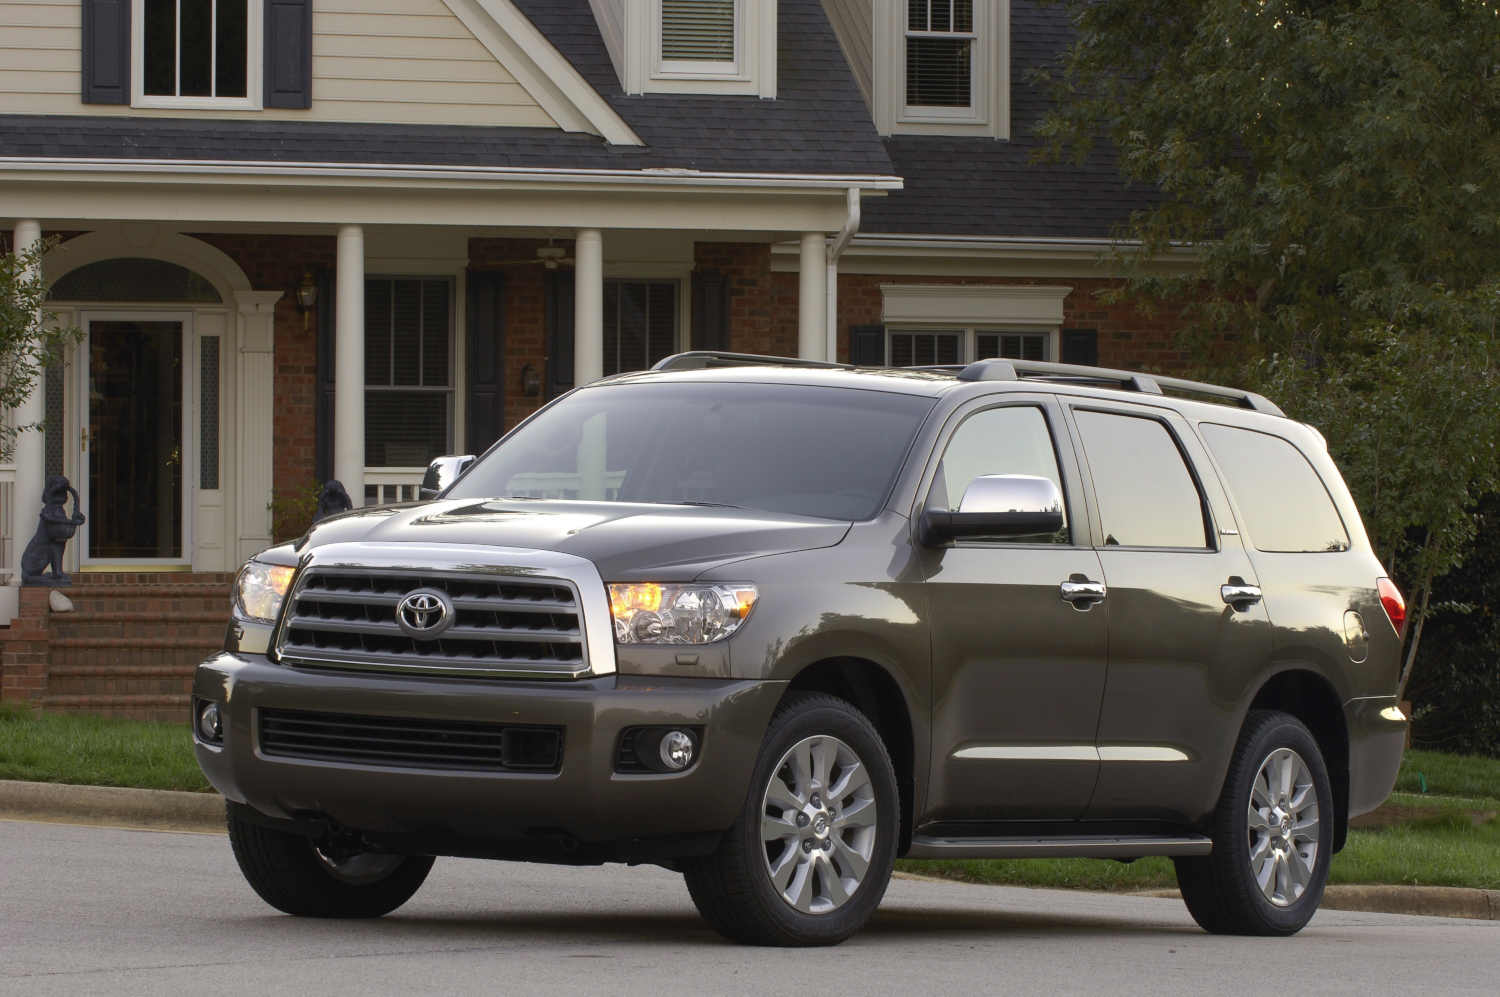 This Toyota Sequoia is one of the least complained about SUVs